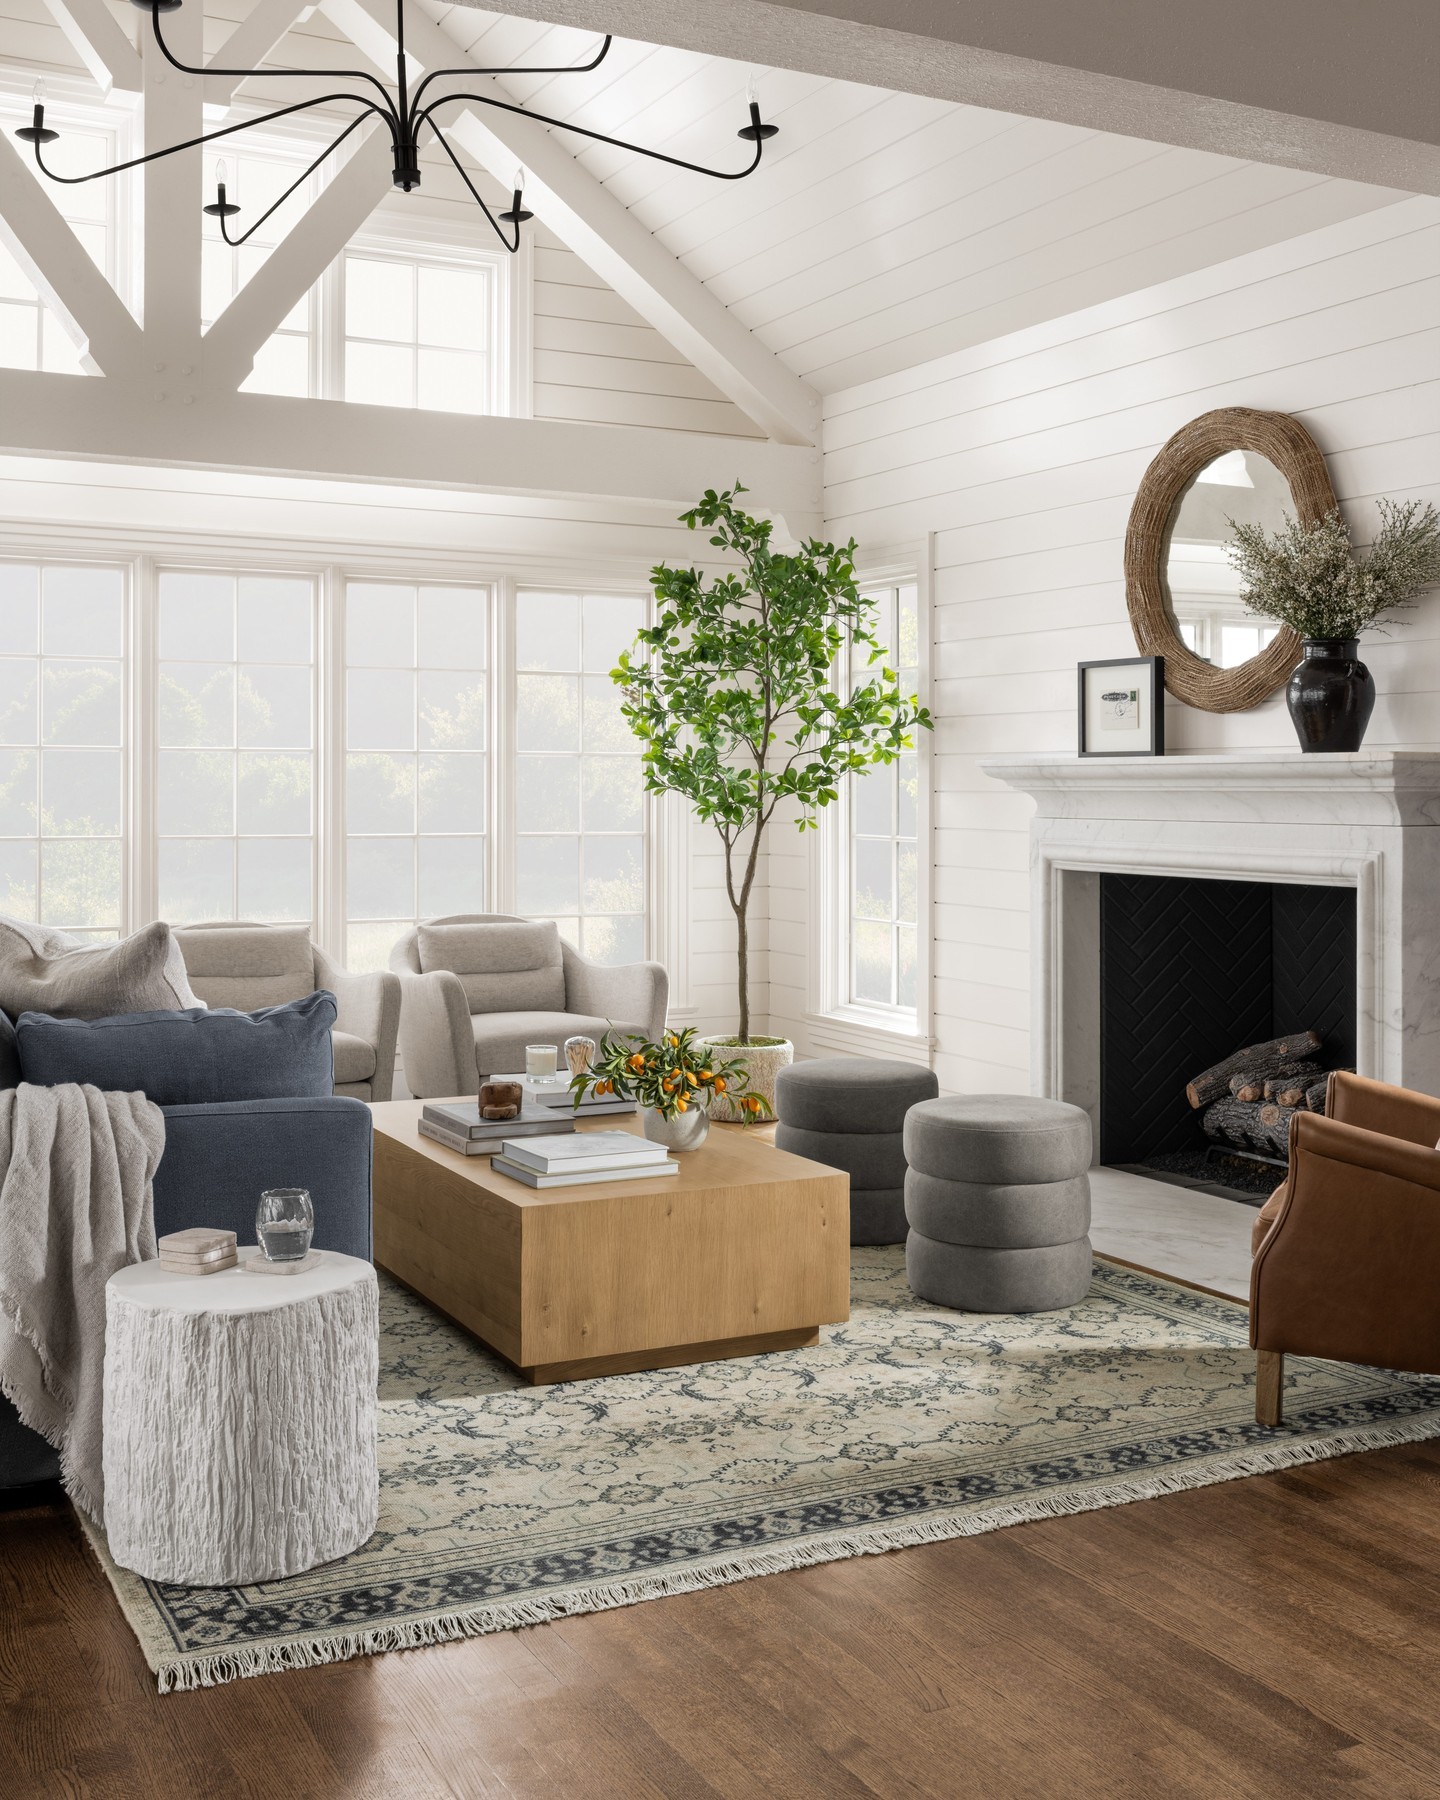 Which living room look from recent @mcgeeandco shoots would you pick first — 1, 2, 3, or 4? ↓